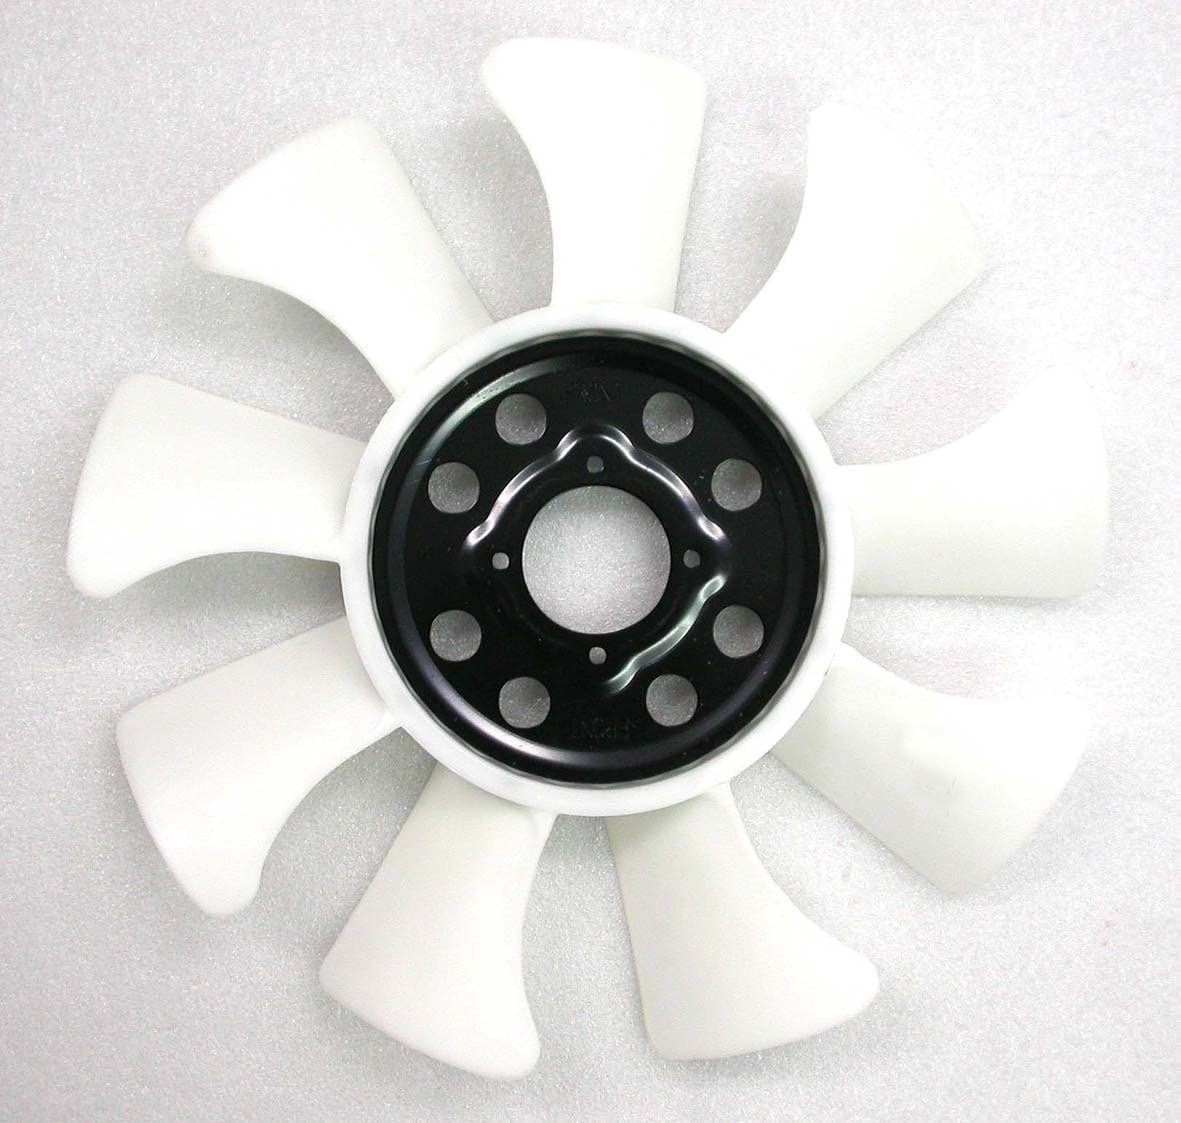 DEPO 330-55035-400 Replacement Engine Cooling Fan Blade (This product is an aftermarket product. It is not created or sold by the OE car company)